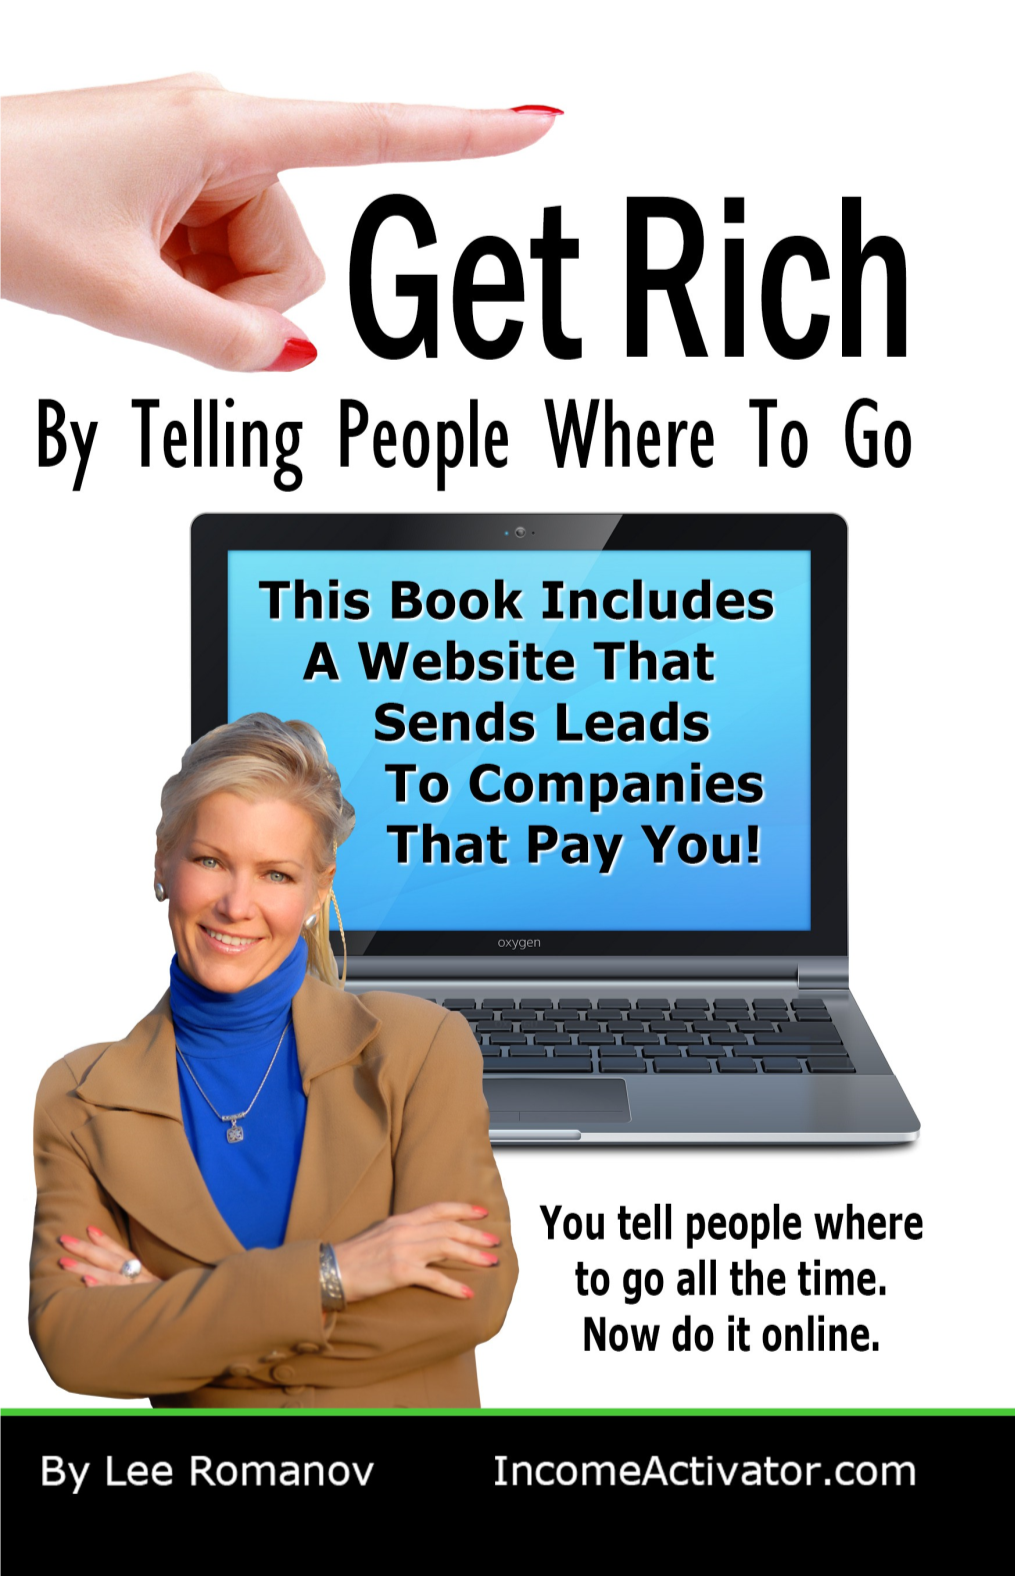 GET RICH by Telling People Where to Go